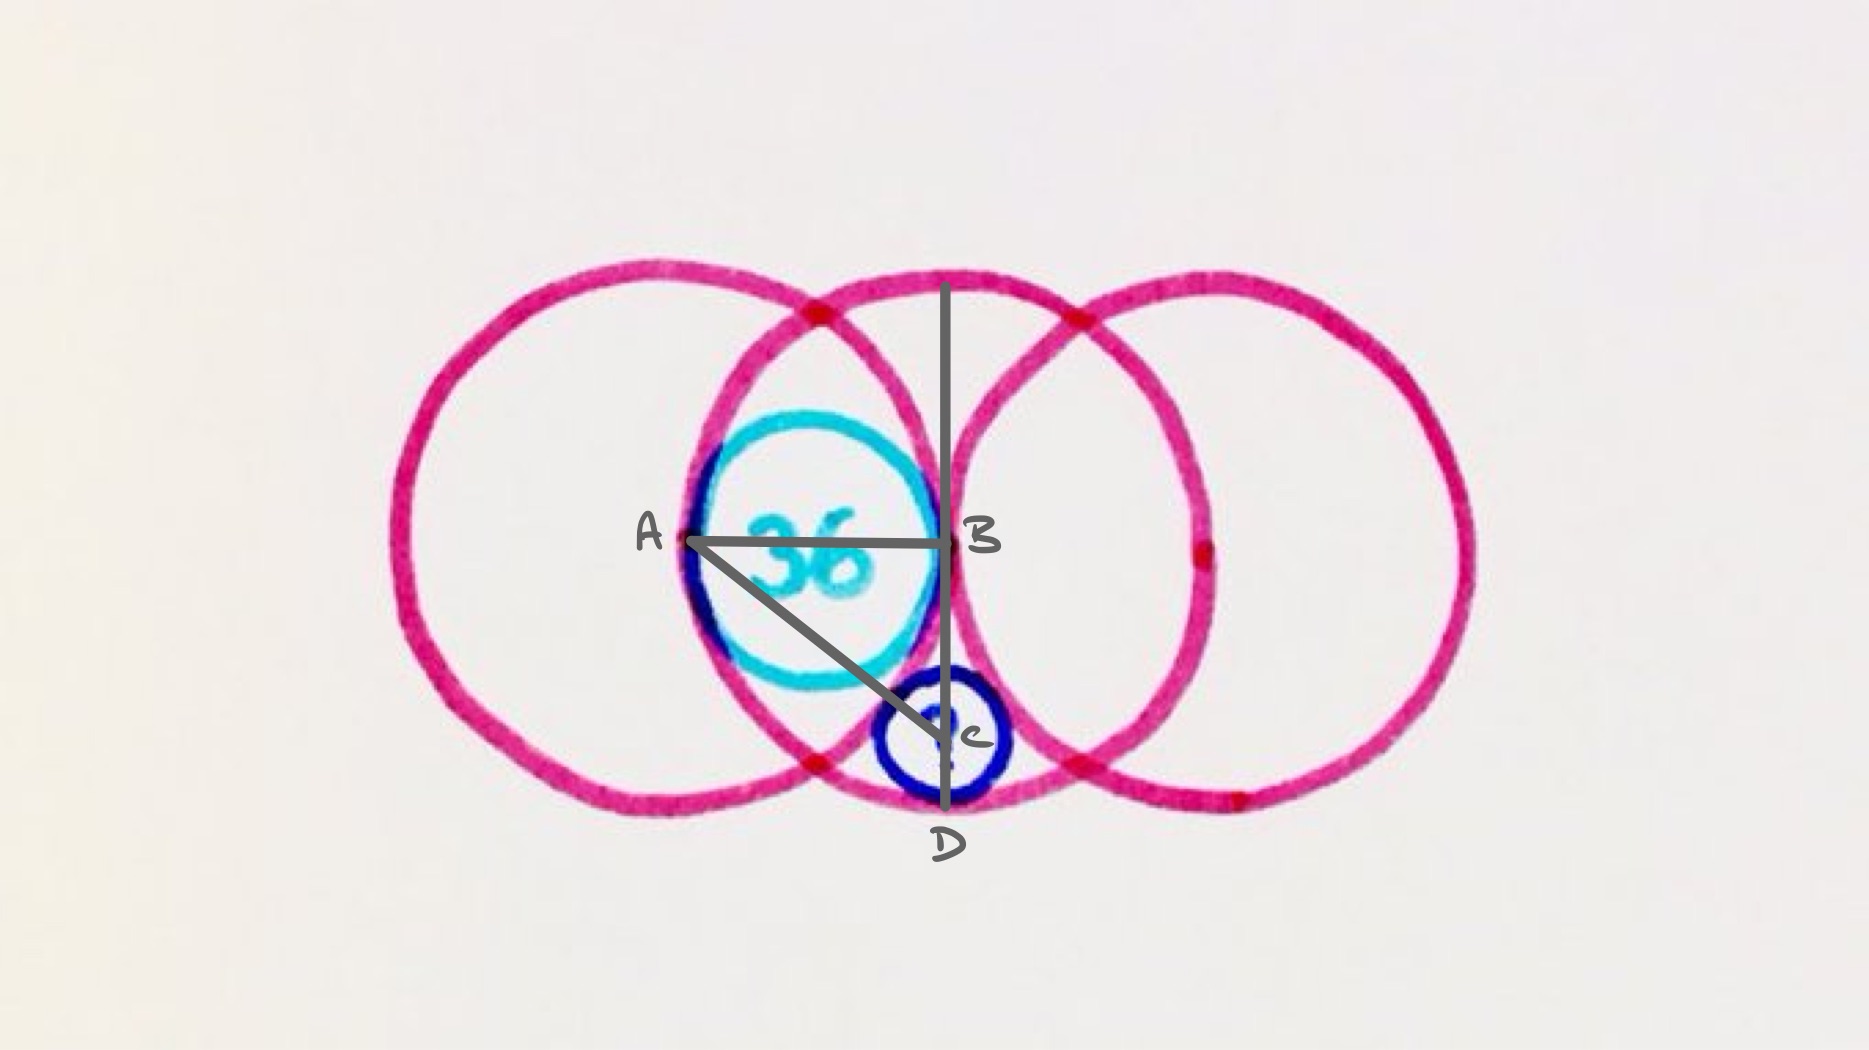 Five overlapping circles labelled